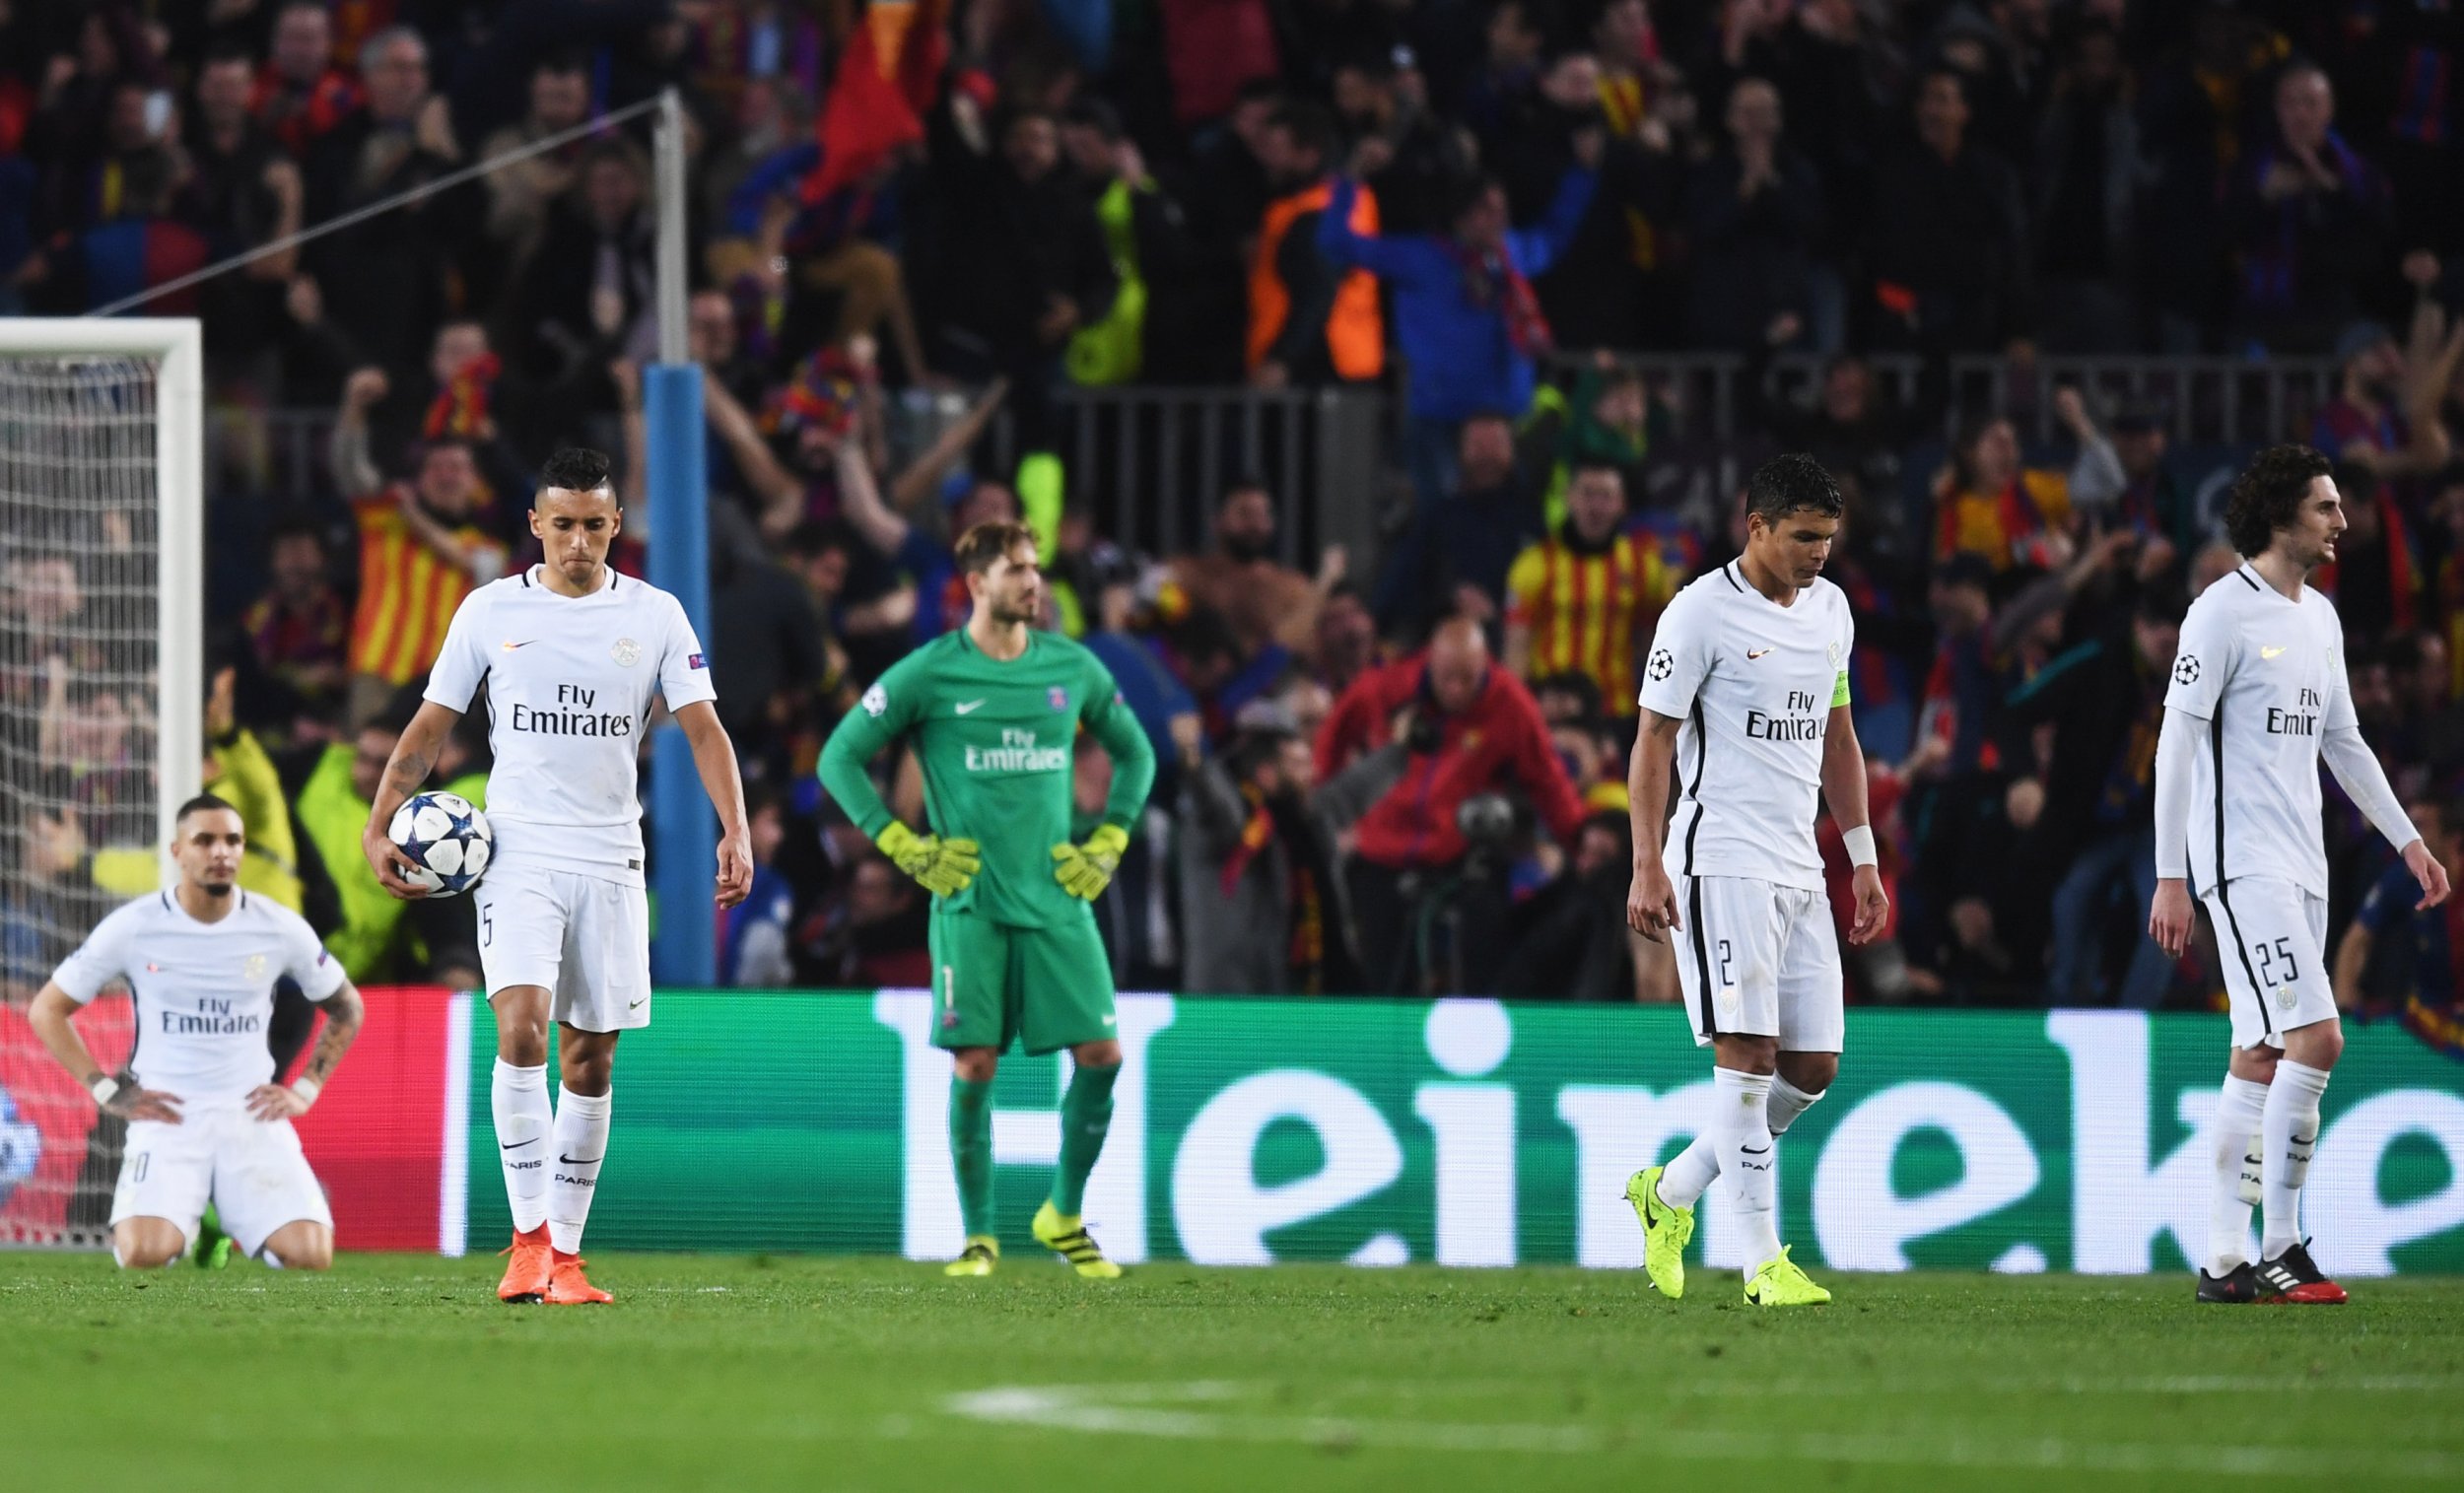 Psg Players React To Their Barcelona Defeat At Camp - Psg Lost Barcelona 6 1 - HD Wallpaper 